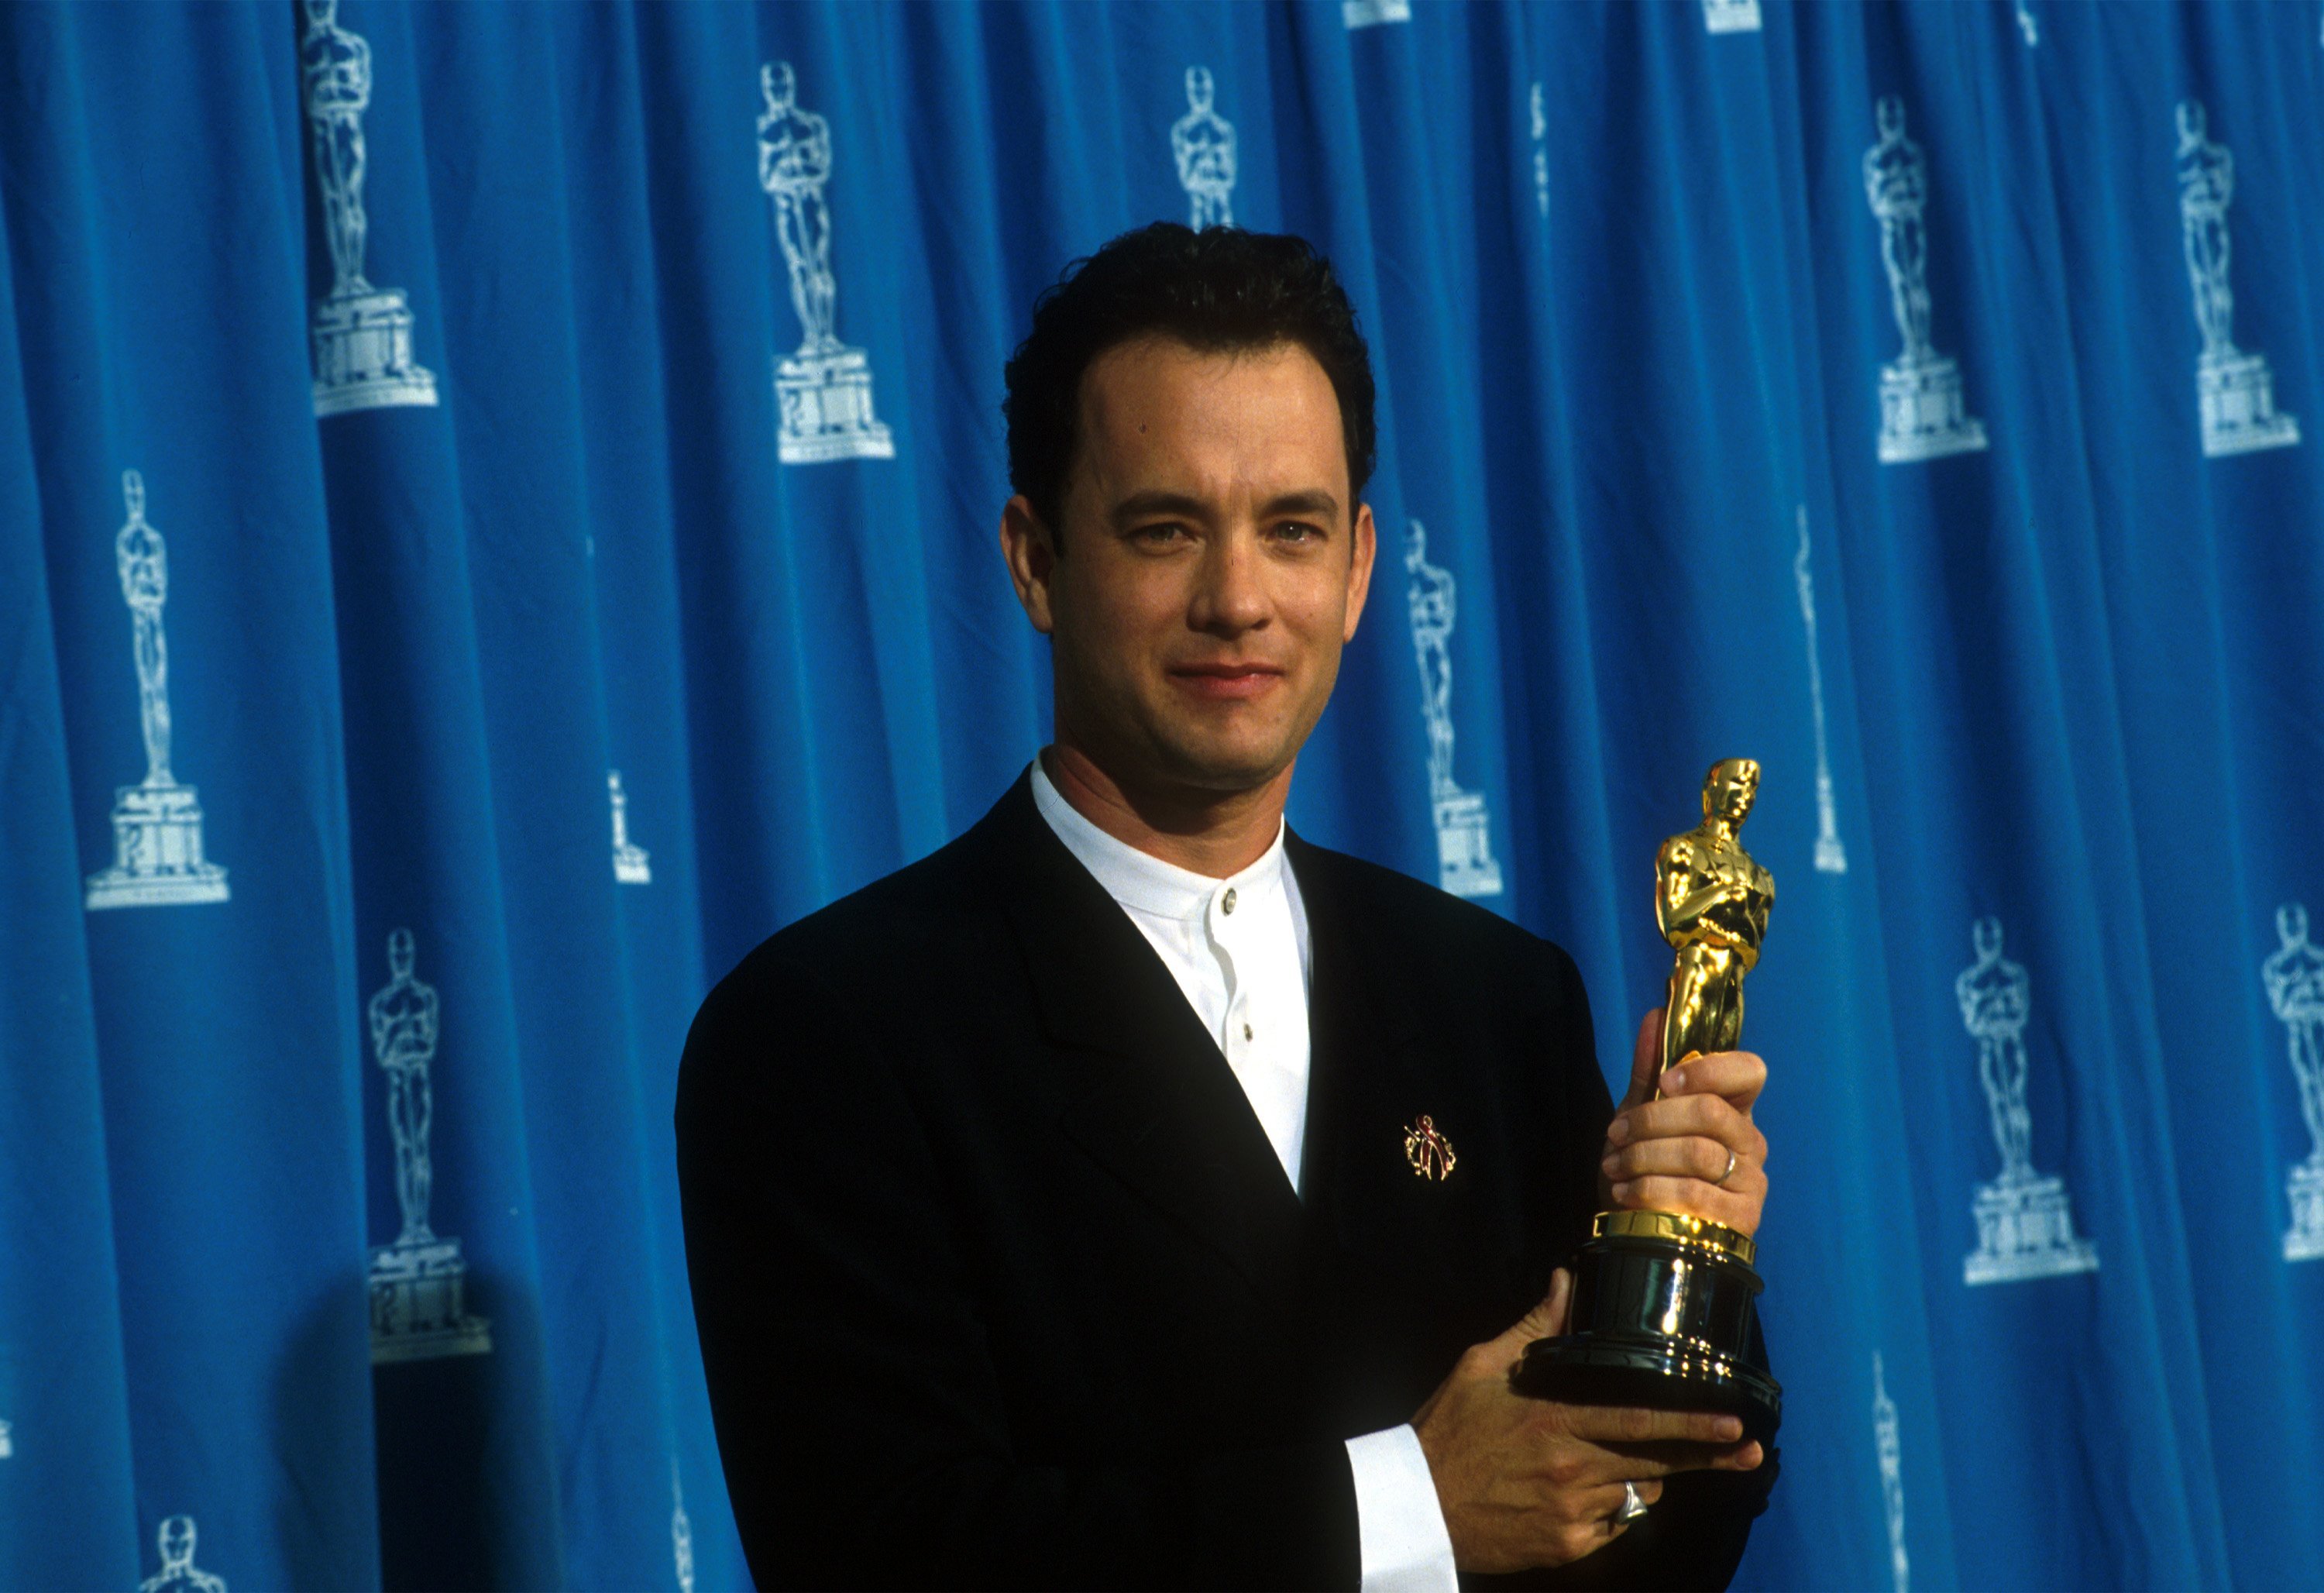 Actor Tom Hanks receives his Oscar at the Academy Awards in Los Angeles, CA., March 29, 1995. | Source: Getty Images.